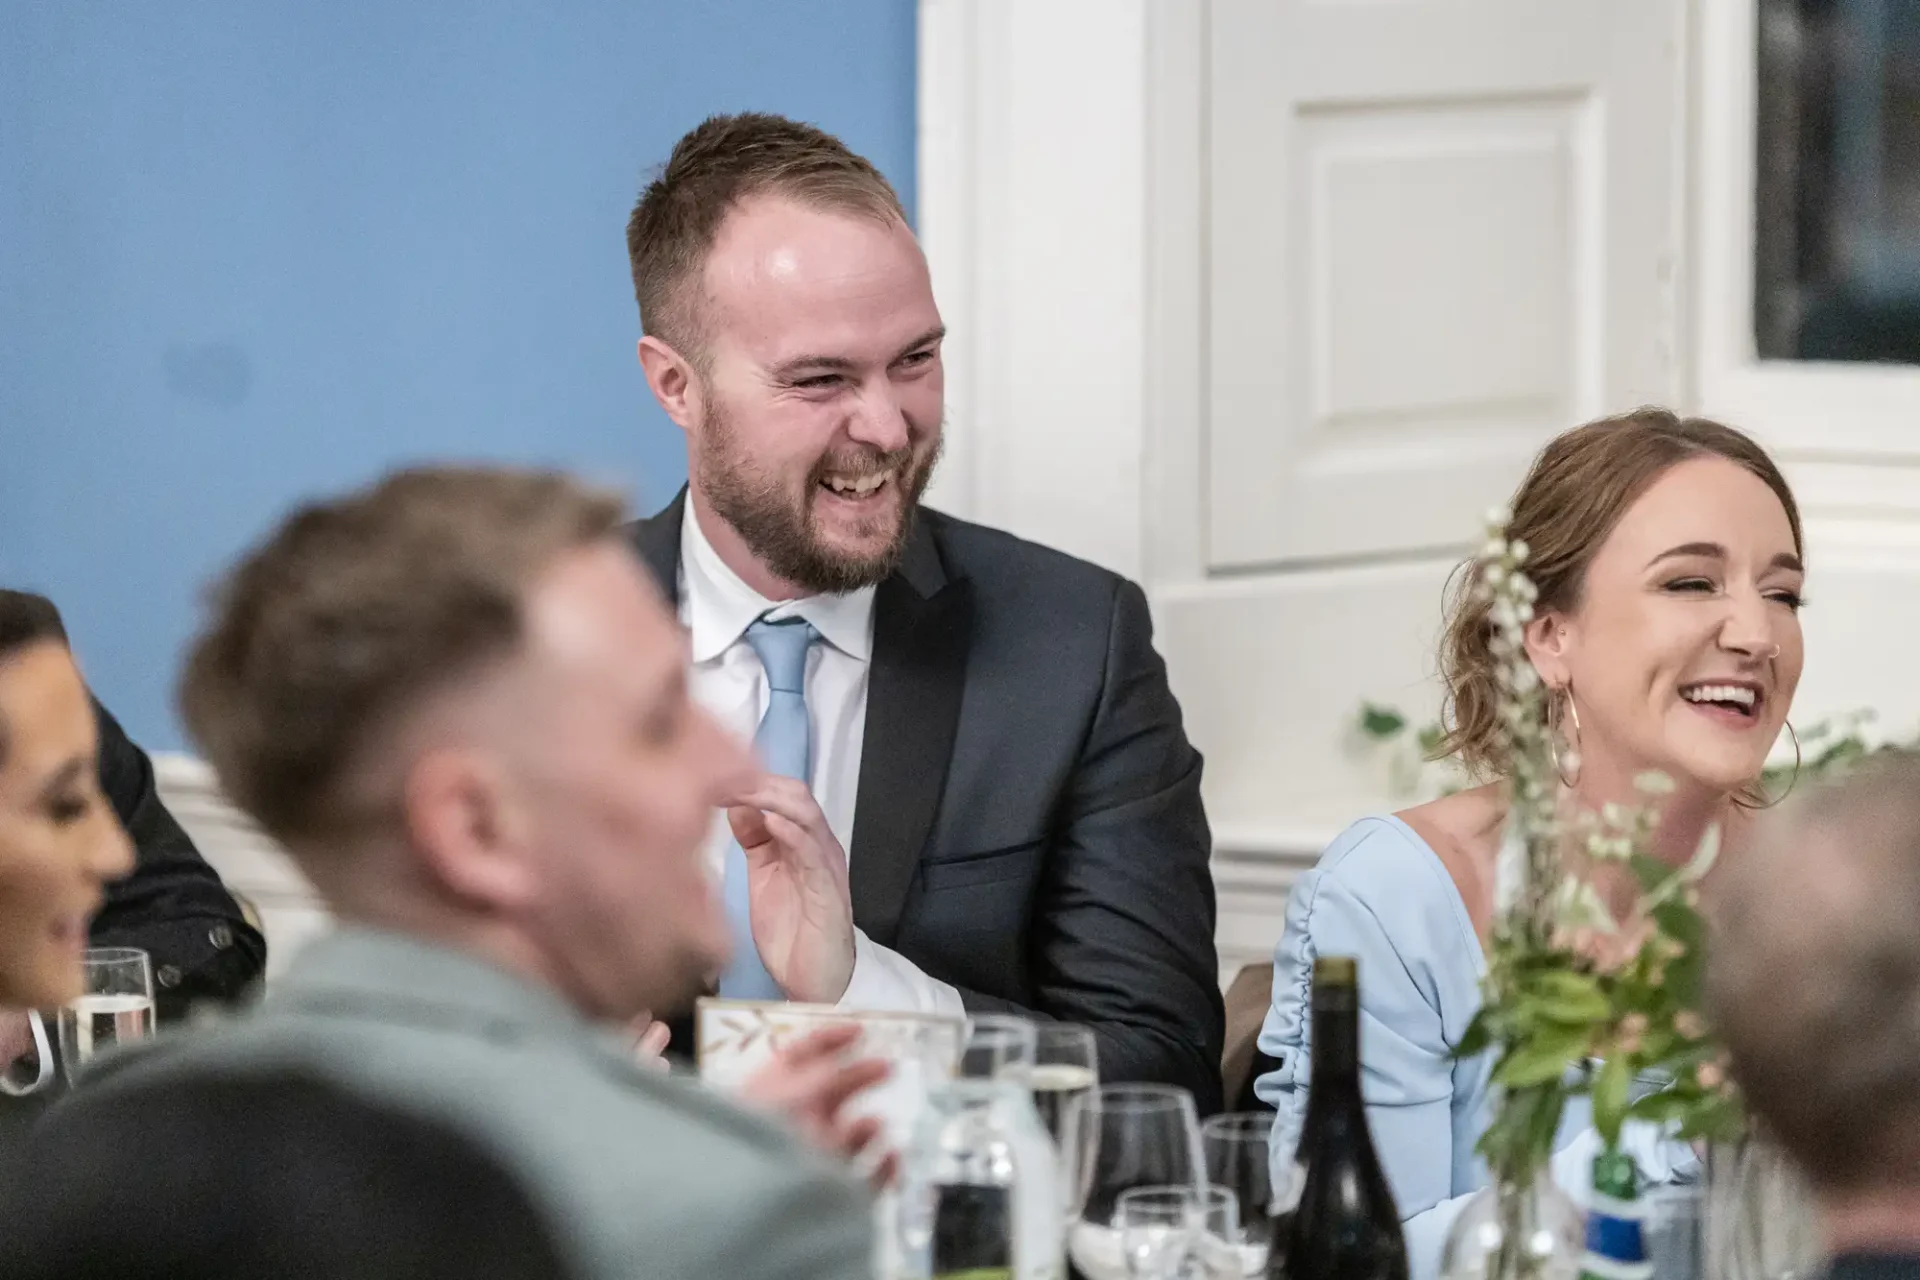 A group of people at a formal event, laughing and conversing around a dining table.